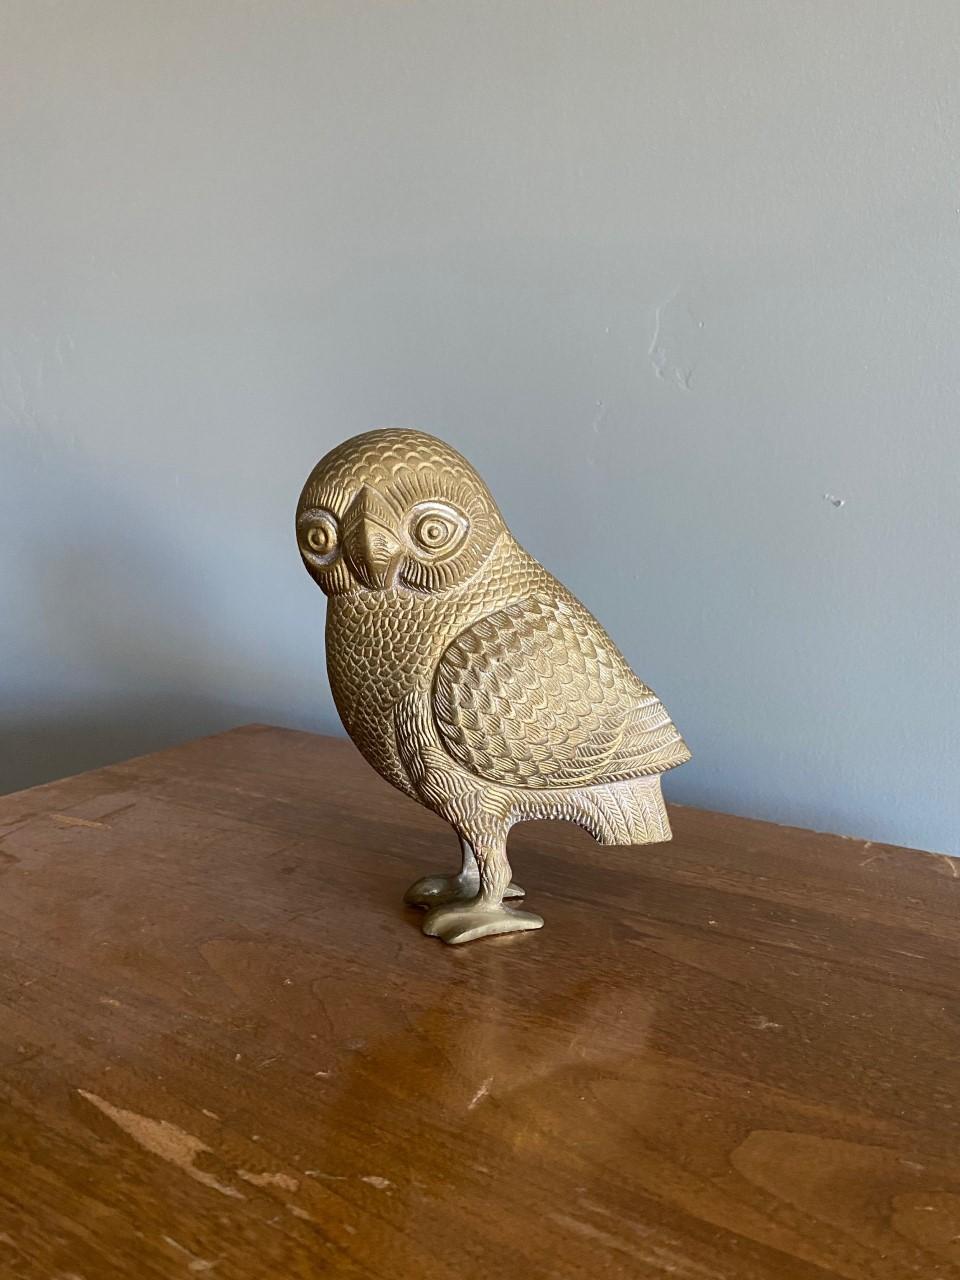 Enigmatic and sublime bronze sculpture of owl of Athena. Traditionally a companion to the goddess of wisdom, the owl representation has been associated with knowledge and wisdom. This mid century representation in bronze of the owl of Athena